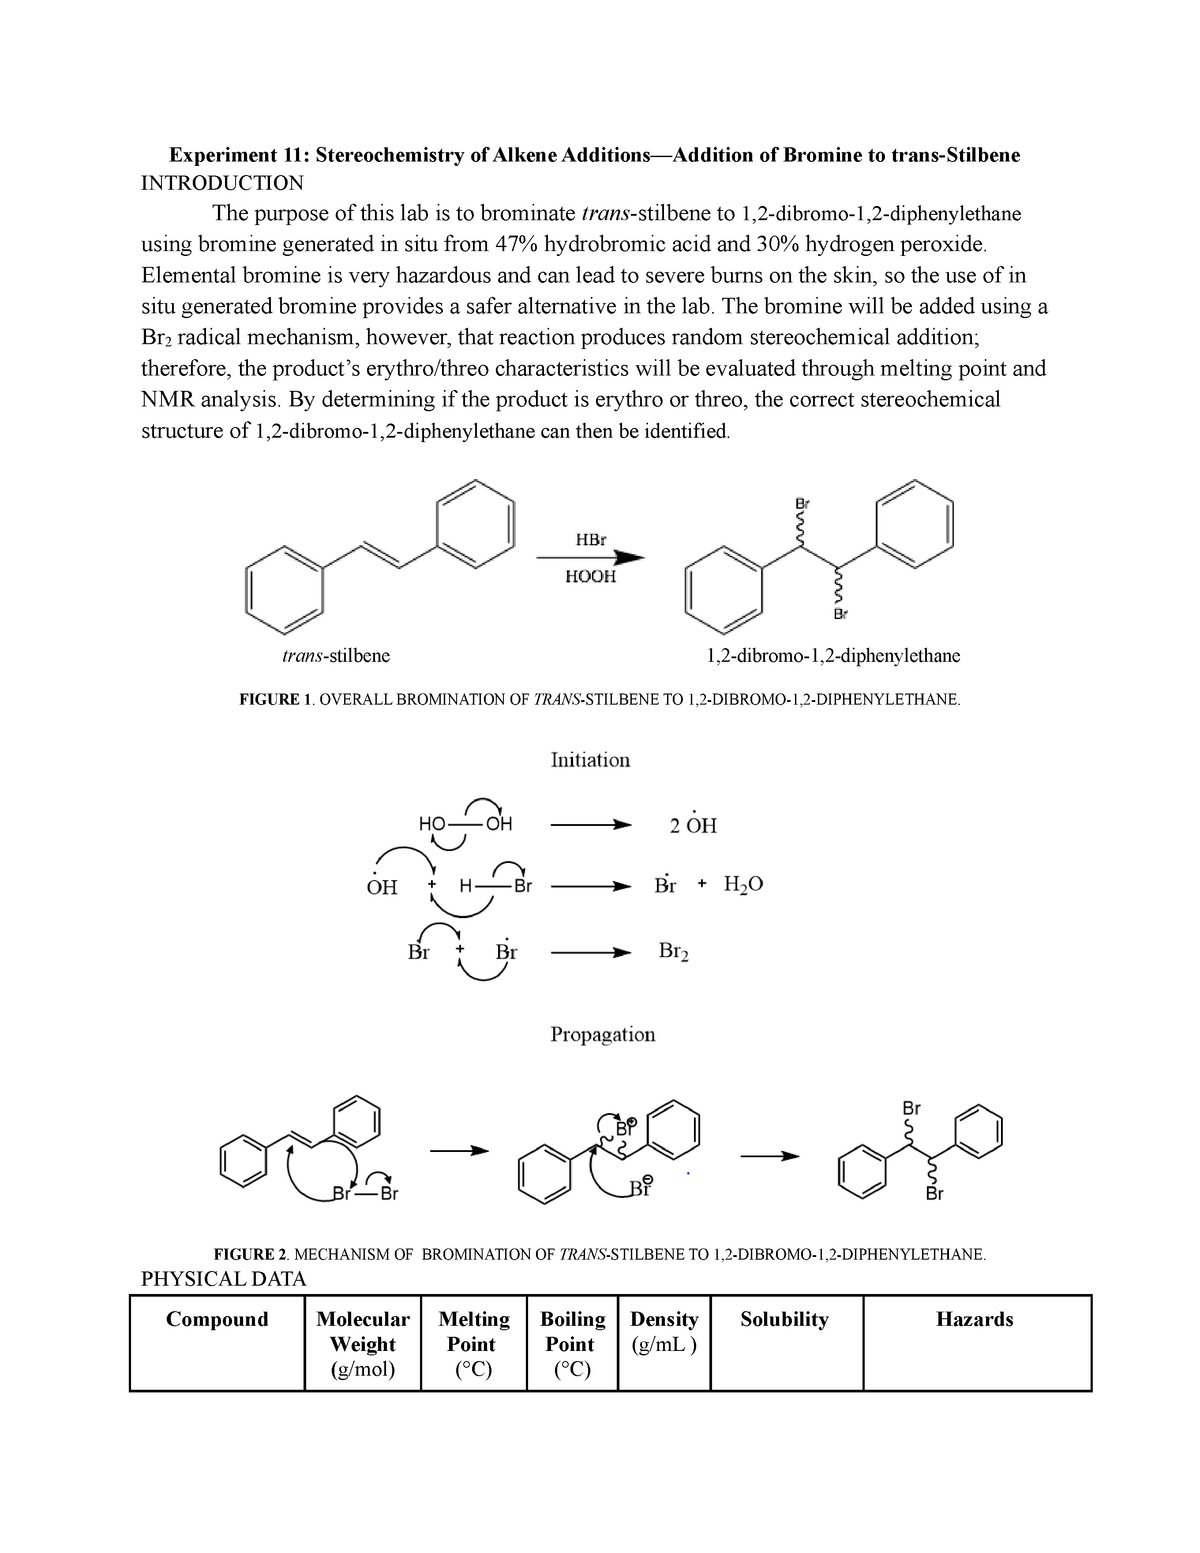 experiment-11-stereochemistry-of-alkene-additions-experiment-11-stereochemistry-of-alkene